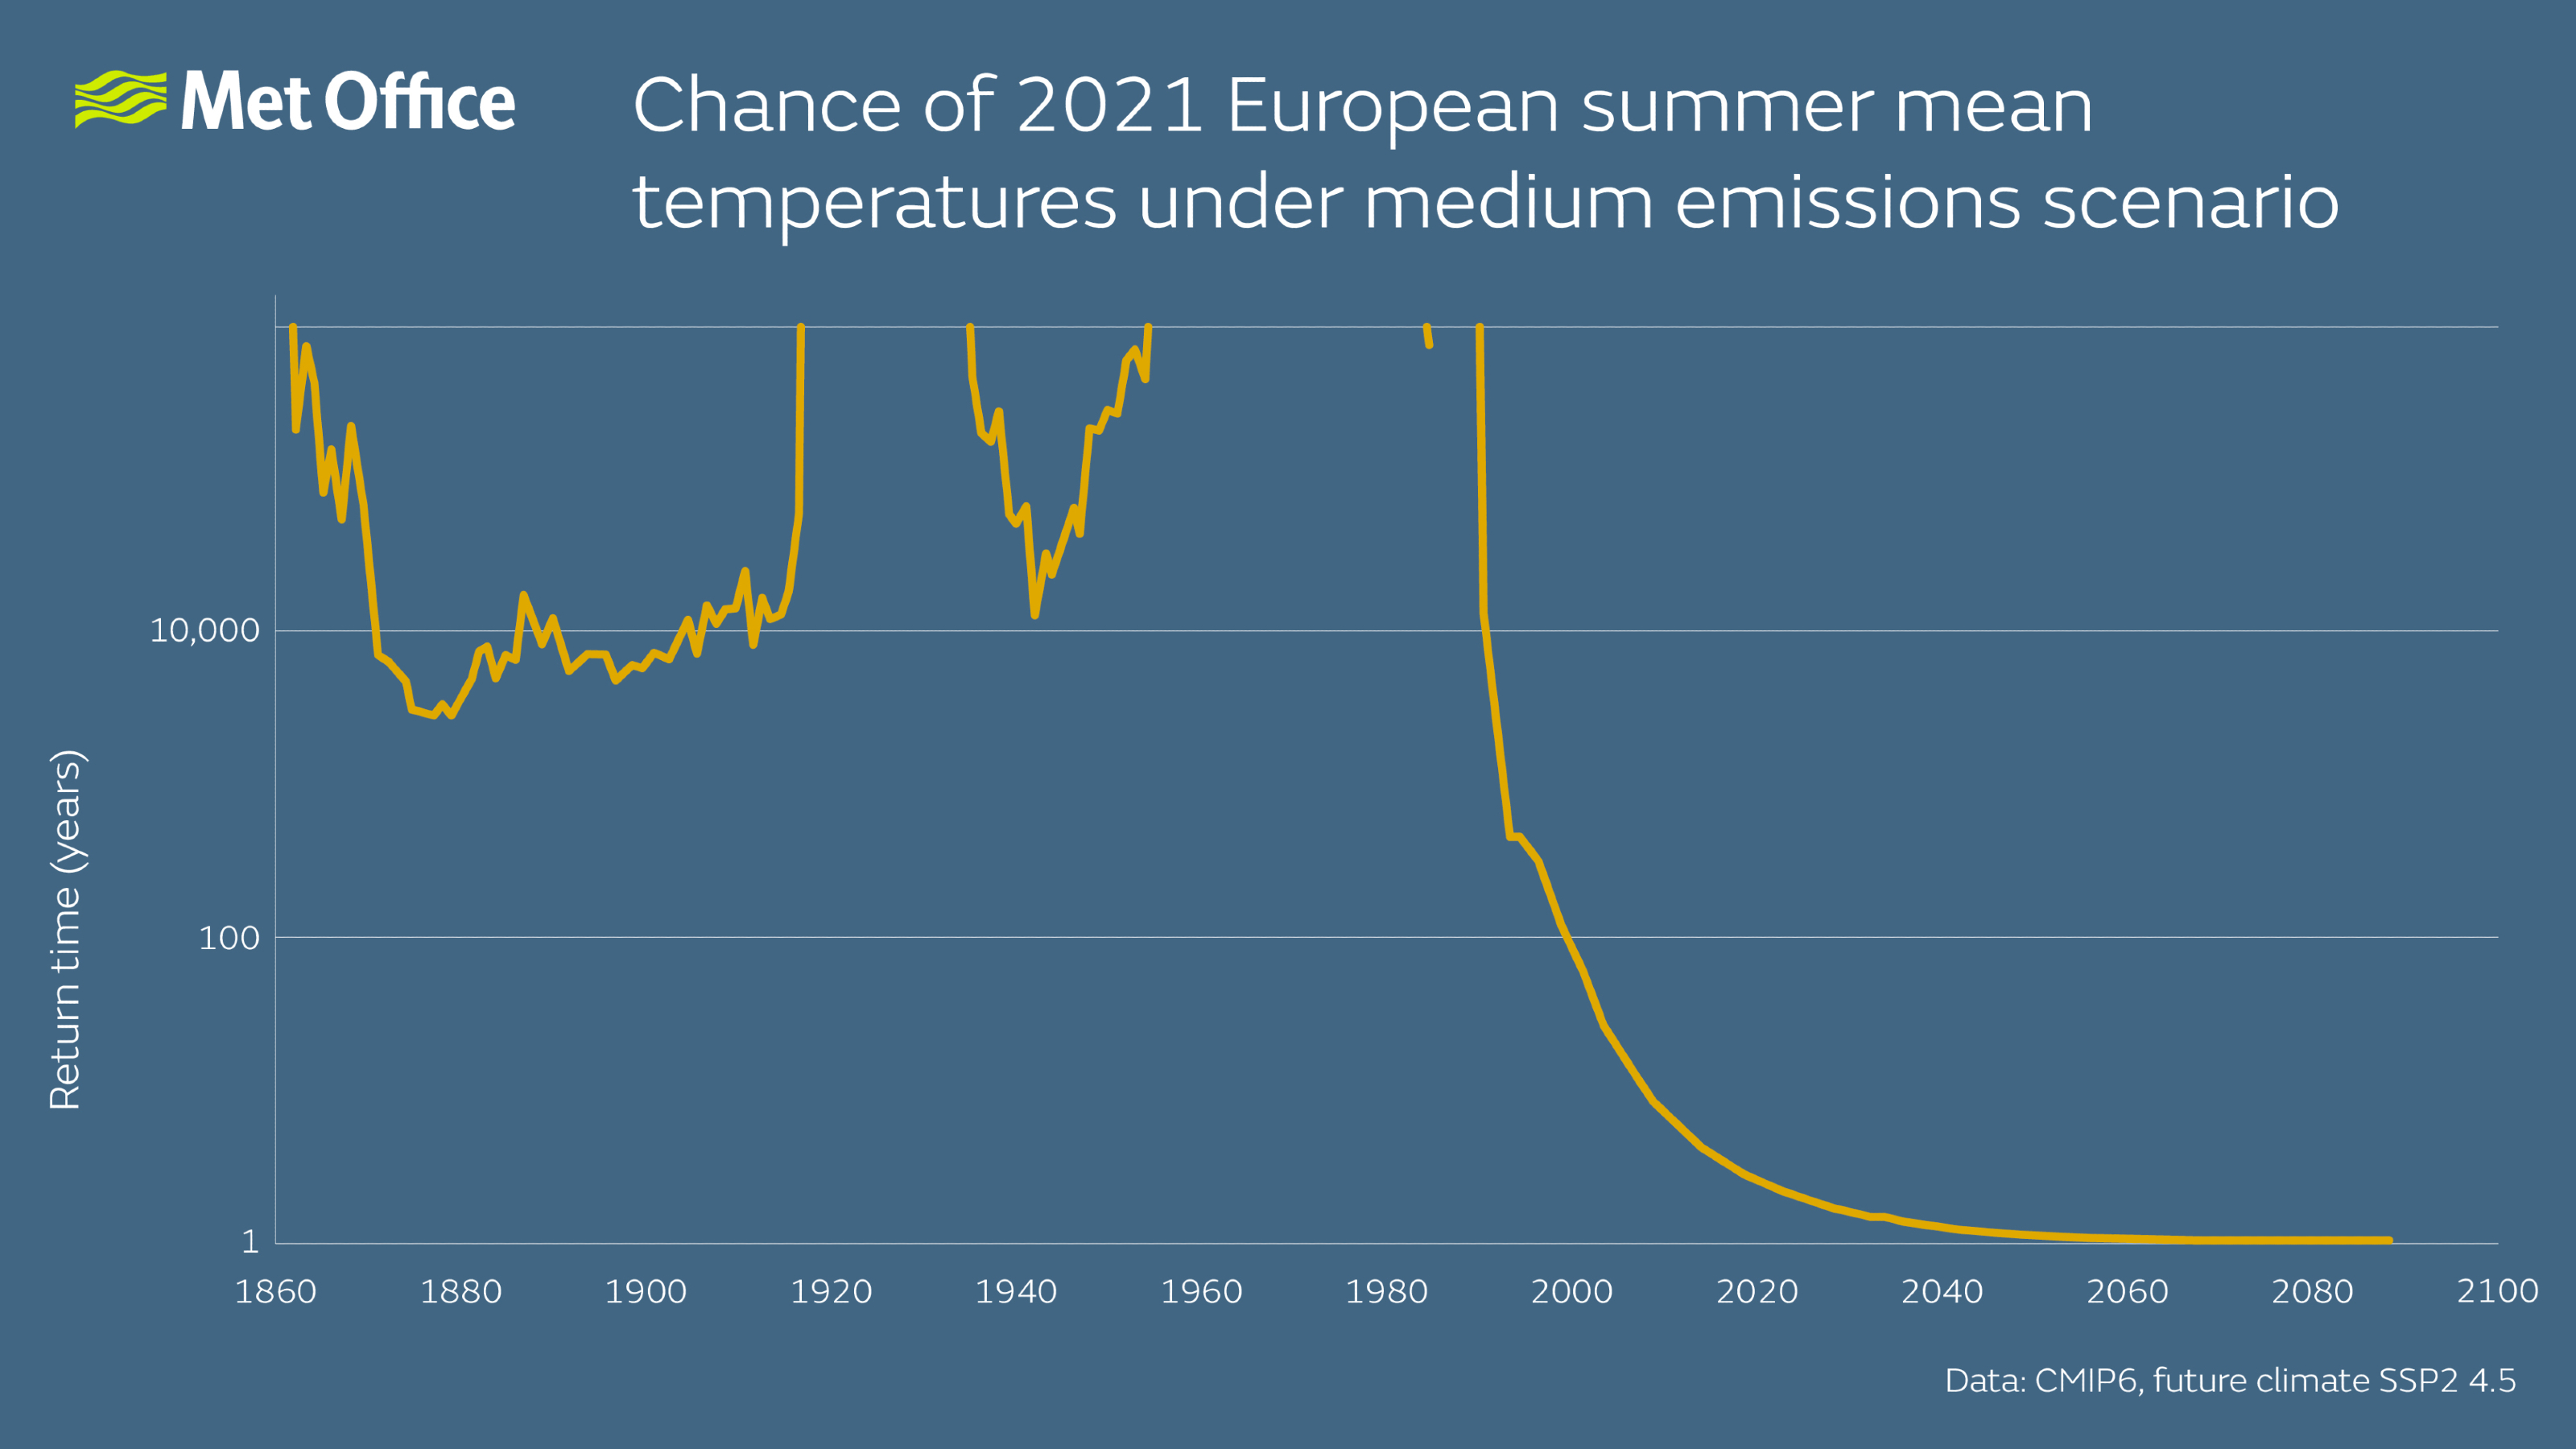 Graph showing the chance of the 2021 European summer mean temperatures under a medium emissions scenario.